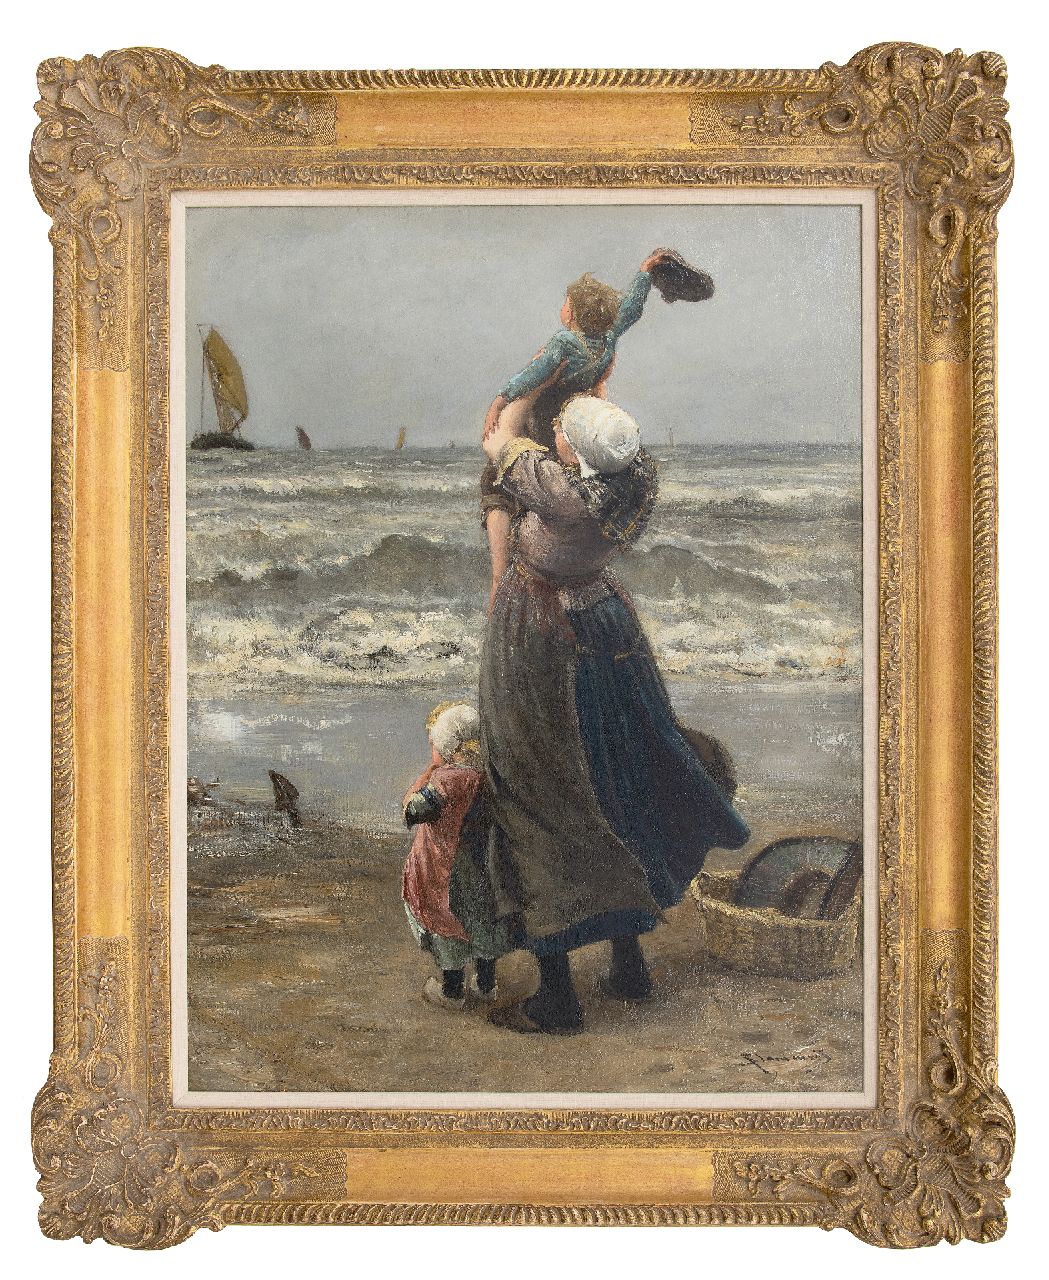 Blommers B.J.  | Bernardus Johannes 'Bernard' Blommers | Paintings offered for sale | Waving father goodbye, oil on canvas 76.0 x 58.2 cm, signed l.r.